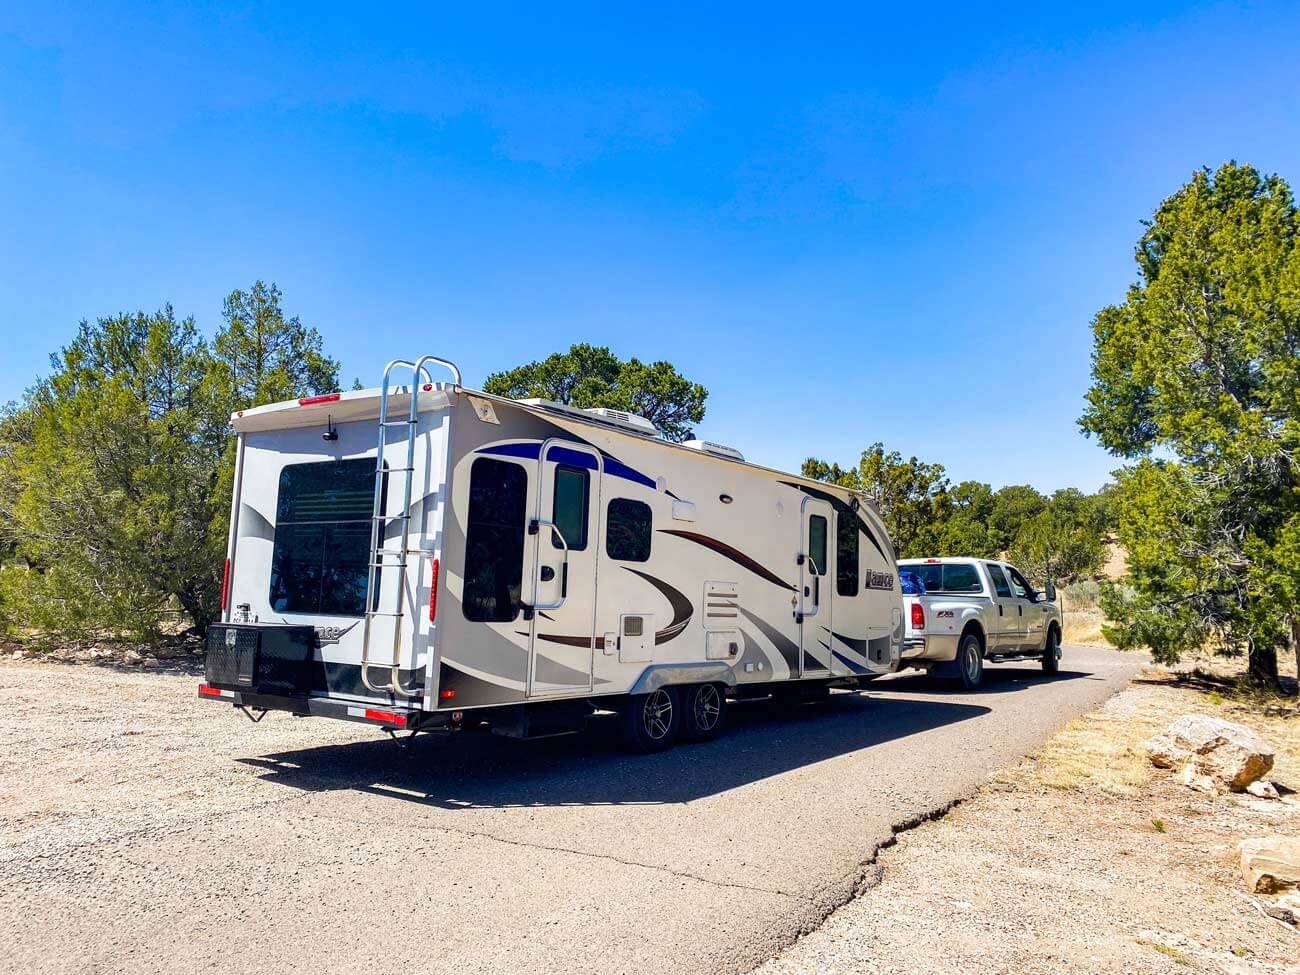 RV travel trailer leaving campground